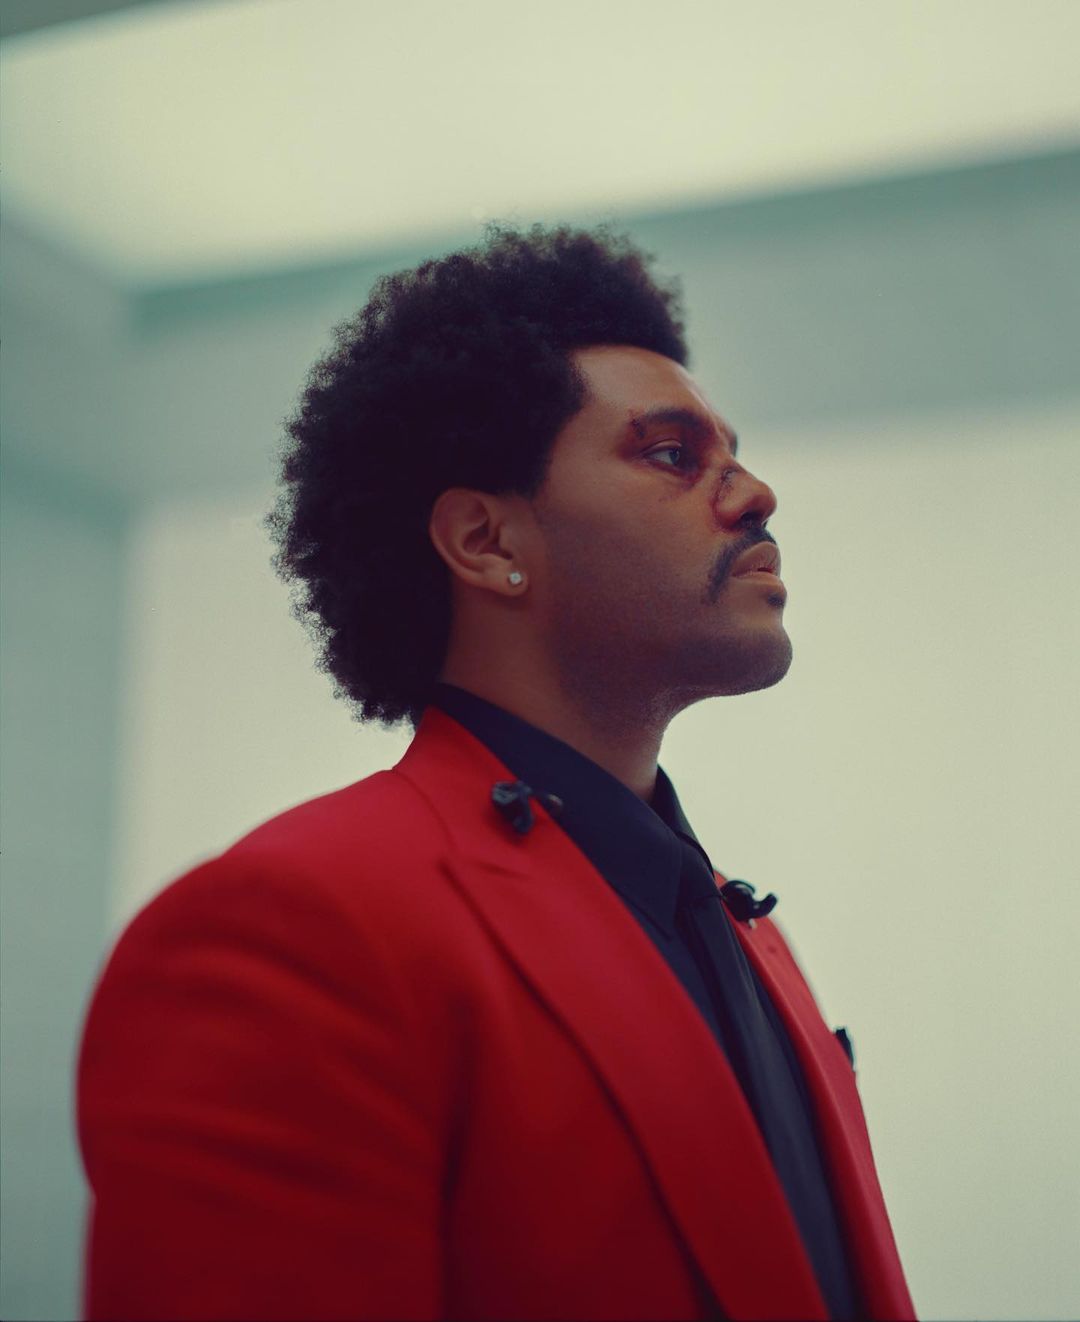 The Weeknd - Biography, Profile, Facts, and Career